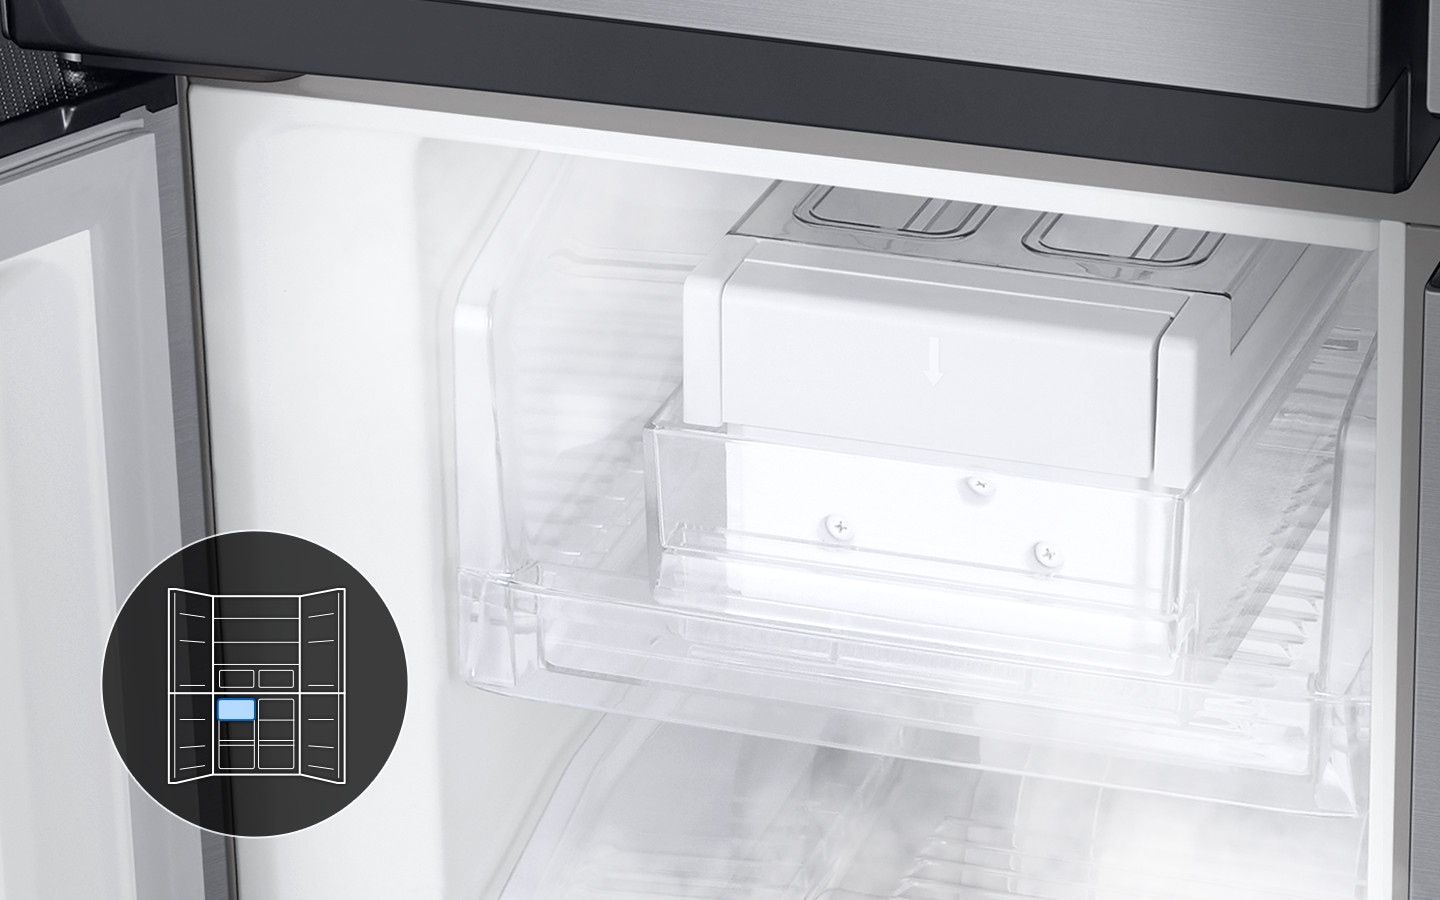 The ice maker is located in the upper left corner of the RF4000TM freezer.